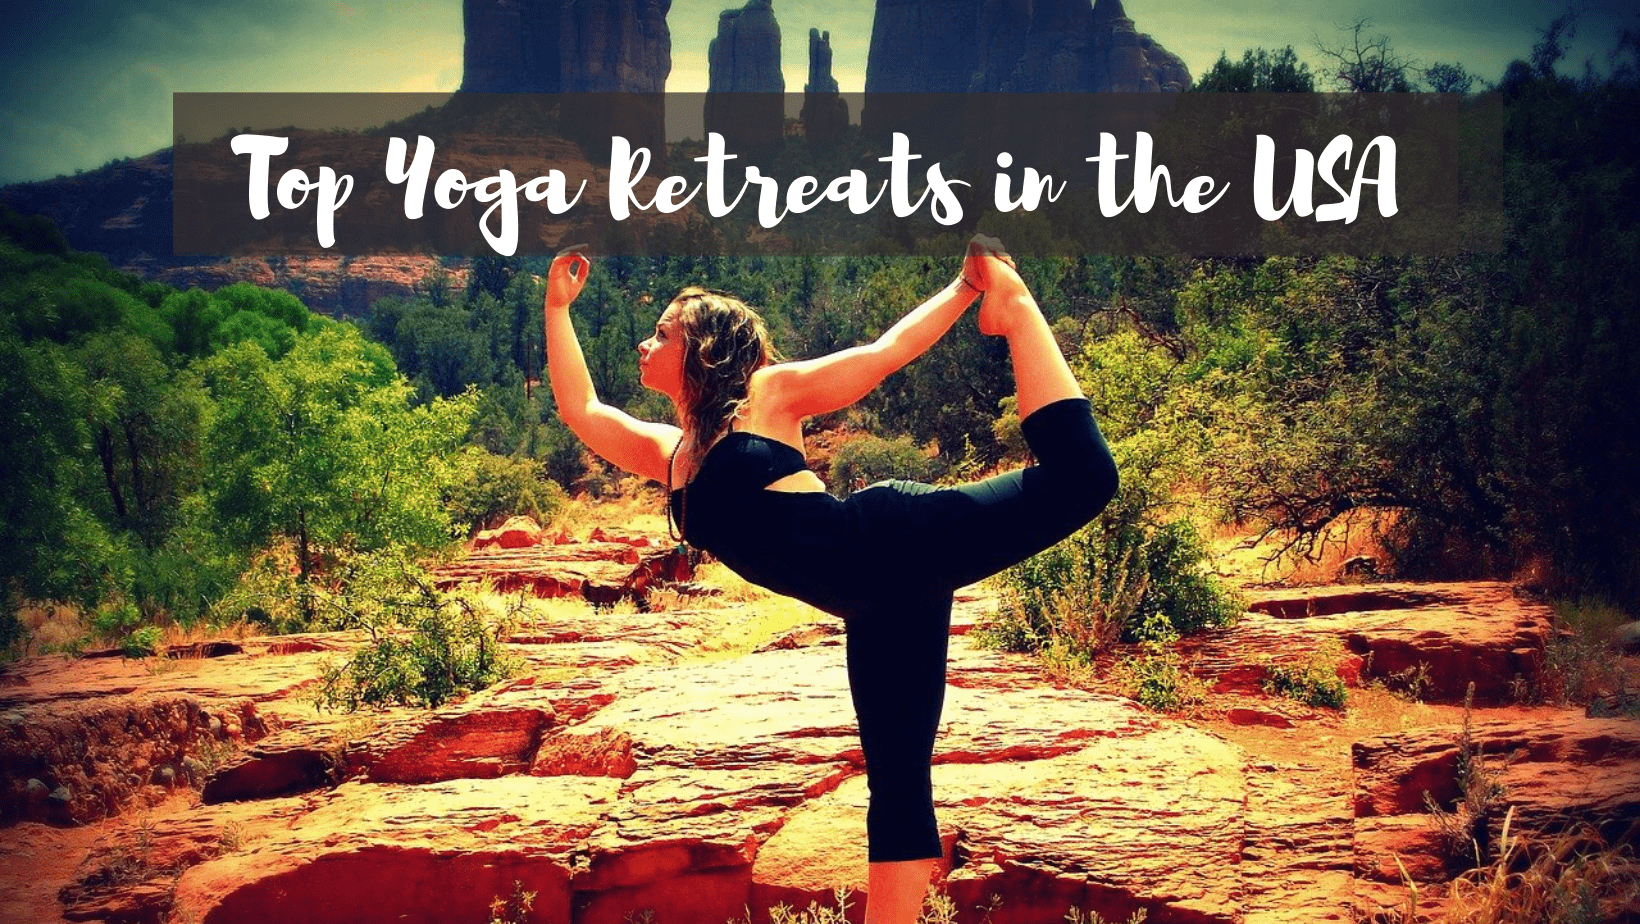 The best yoga retreats in the USA, America